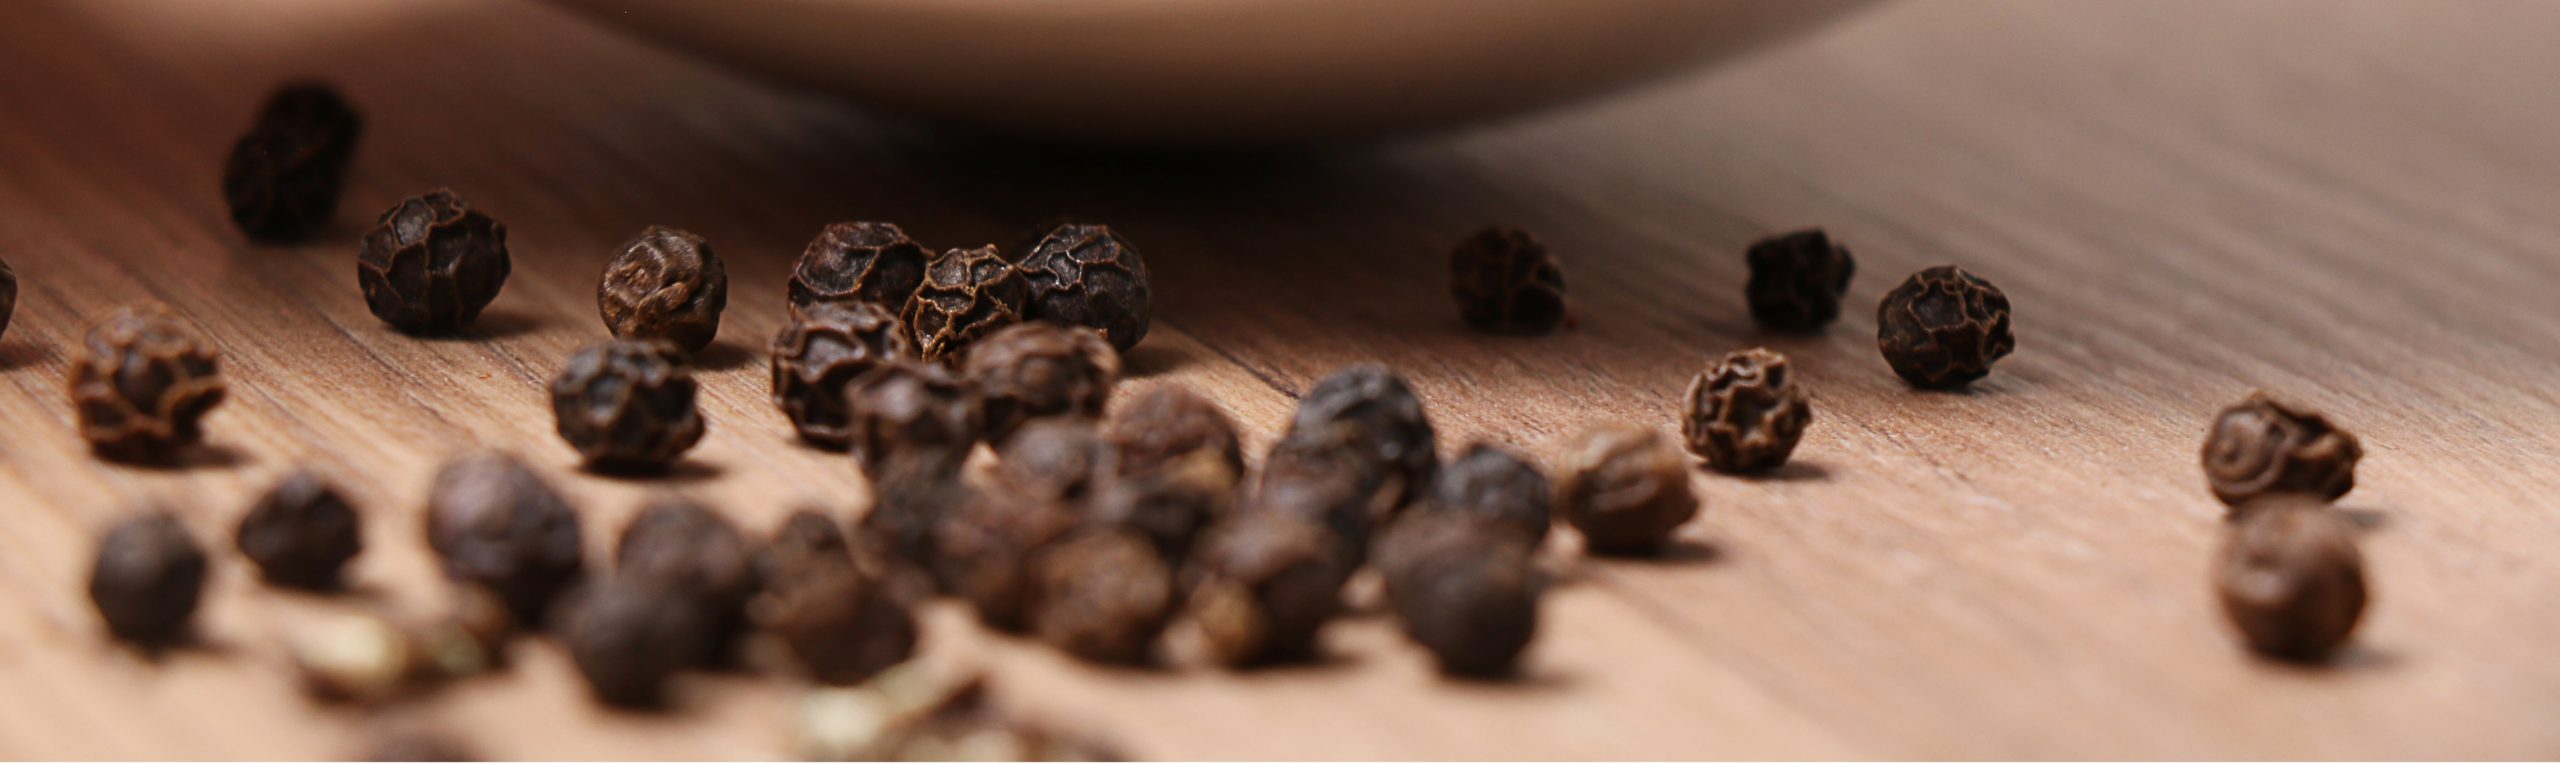 5 Manly Uses for Black Pepper Essential Oil - peppercorns